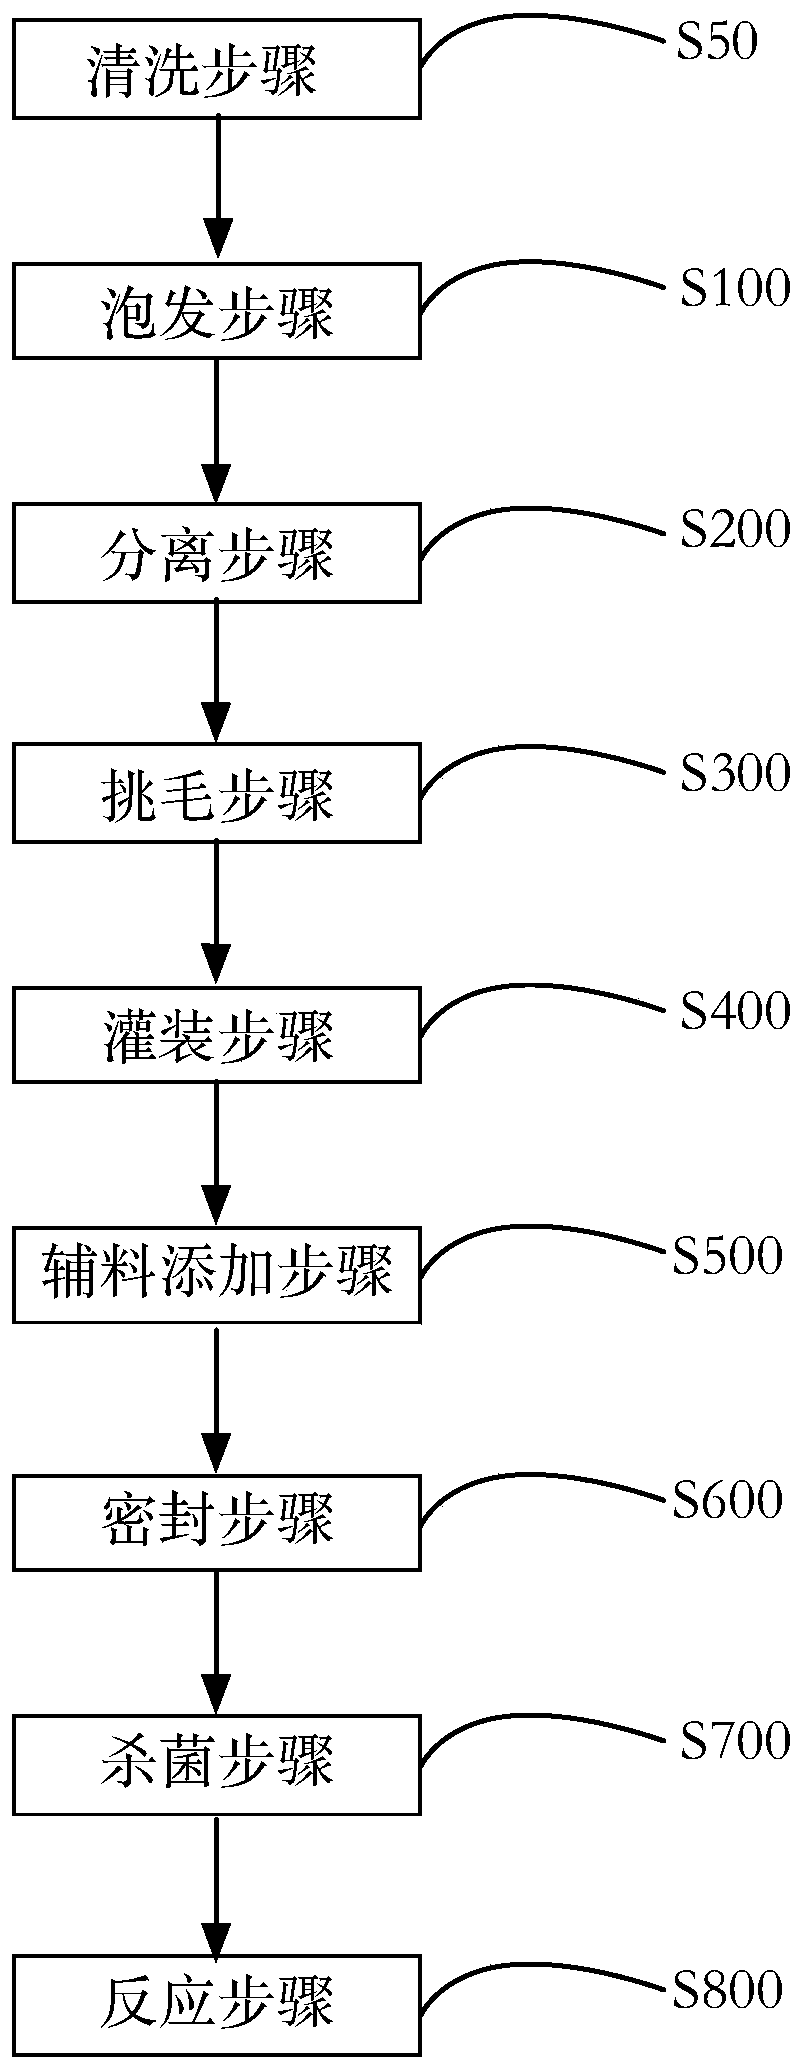 Non-thermal processing method of instant bird's nest